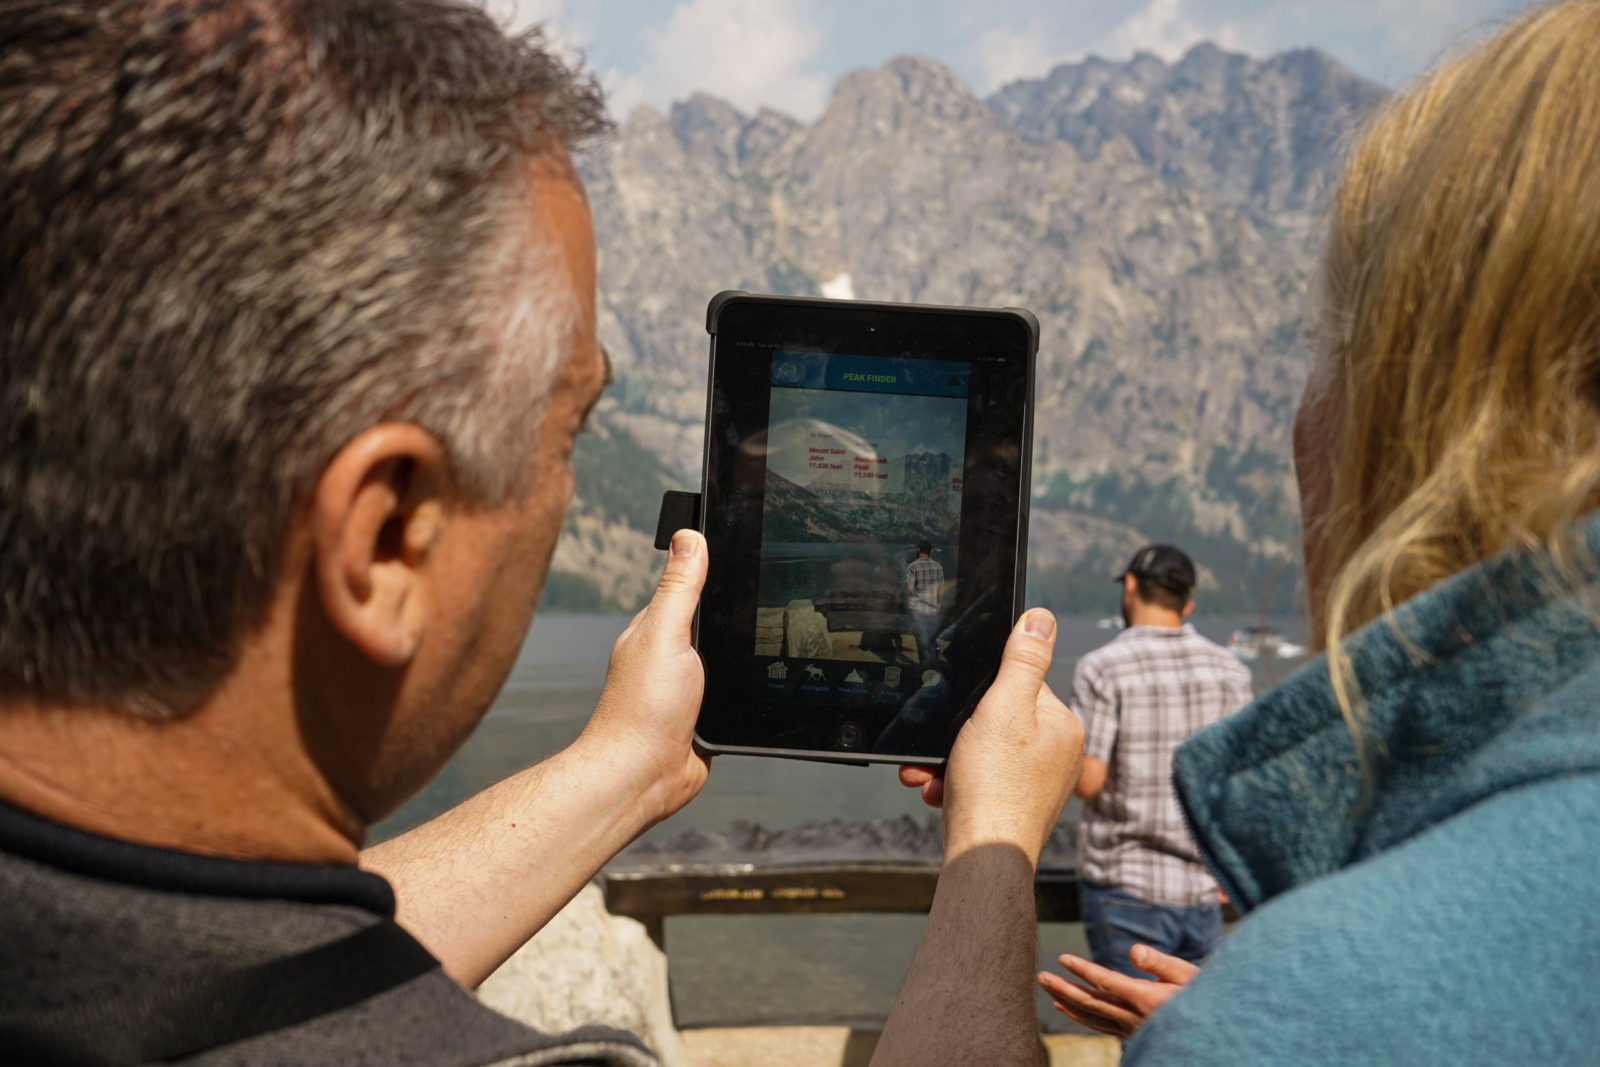 The new app integrates with onsite exhibits, the Discovery Trail, and lake overlooks around Jenny Lake.